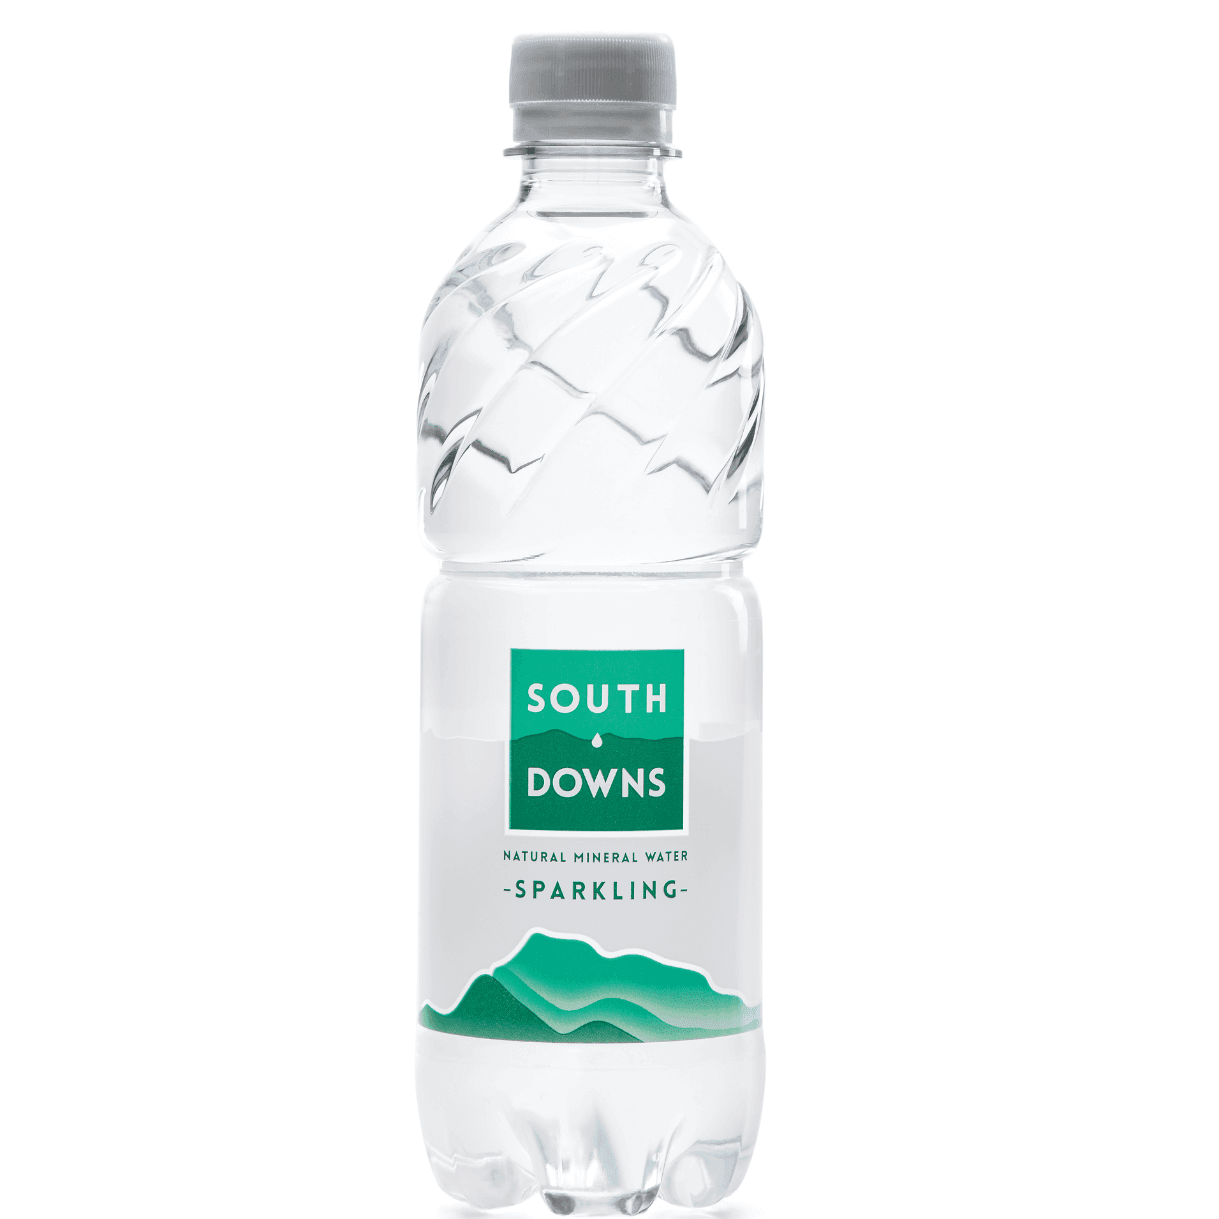 Product Sparkling Bottled Natural Mineral Water 500ml (Case of 24) image